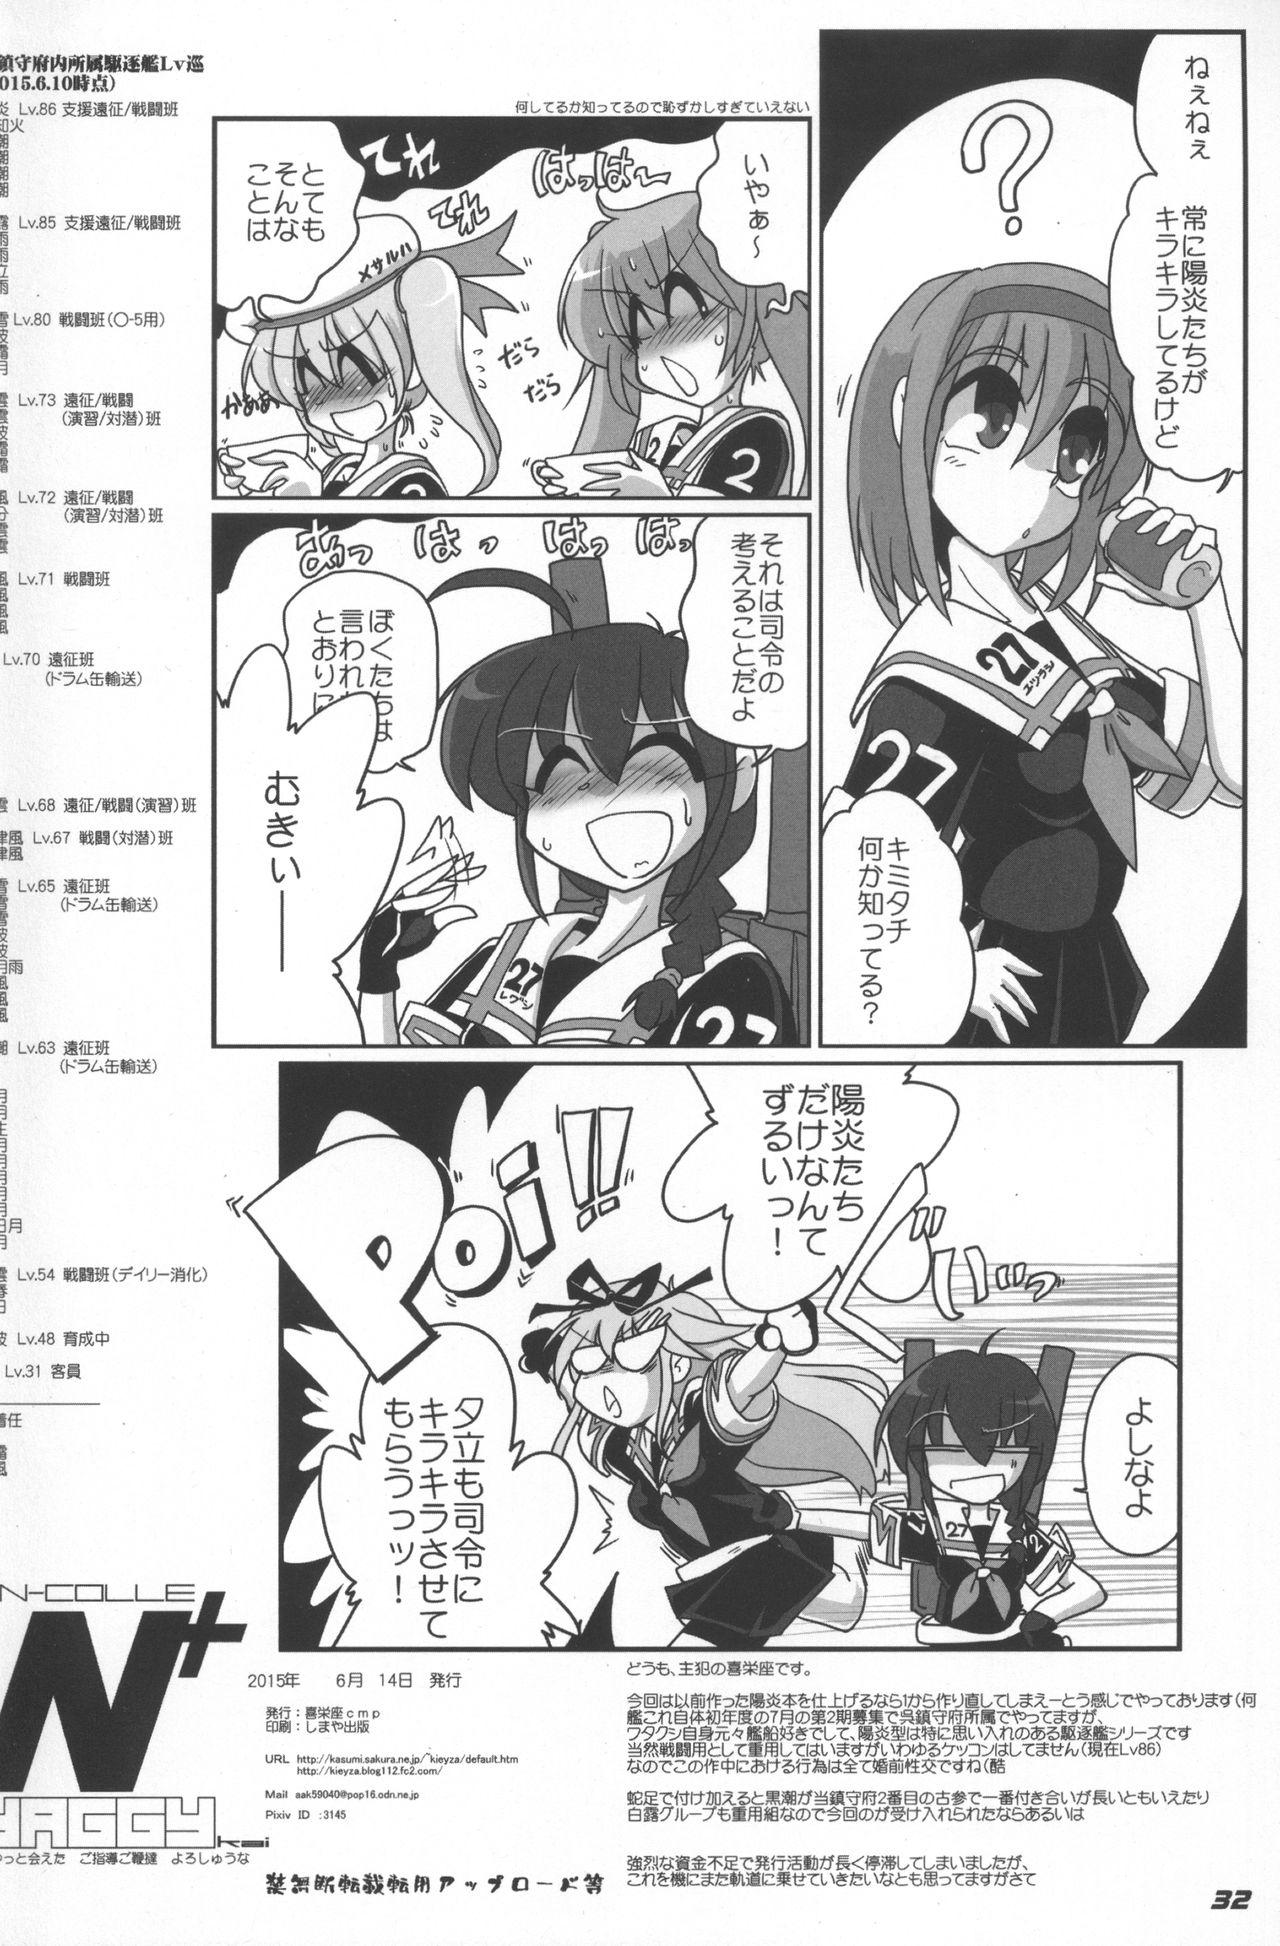 Stockings KAN-COLLE N+ YAGGY kai - Kantai collection Gay Uncut - Page 33